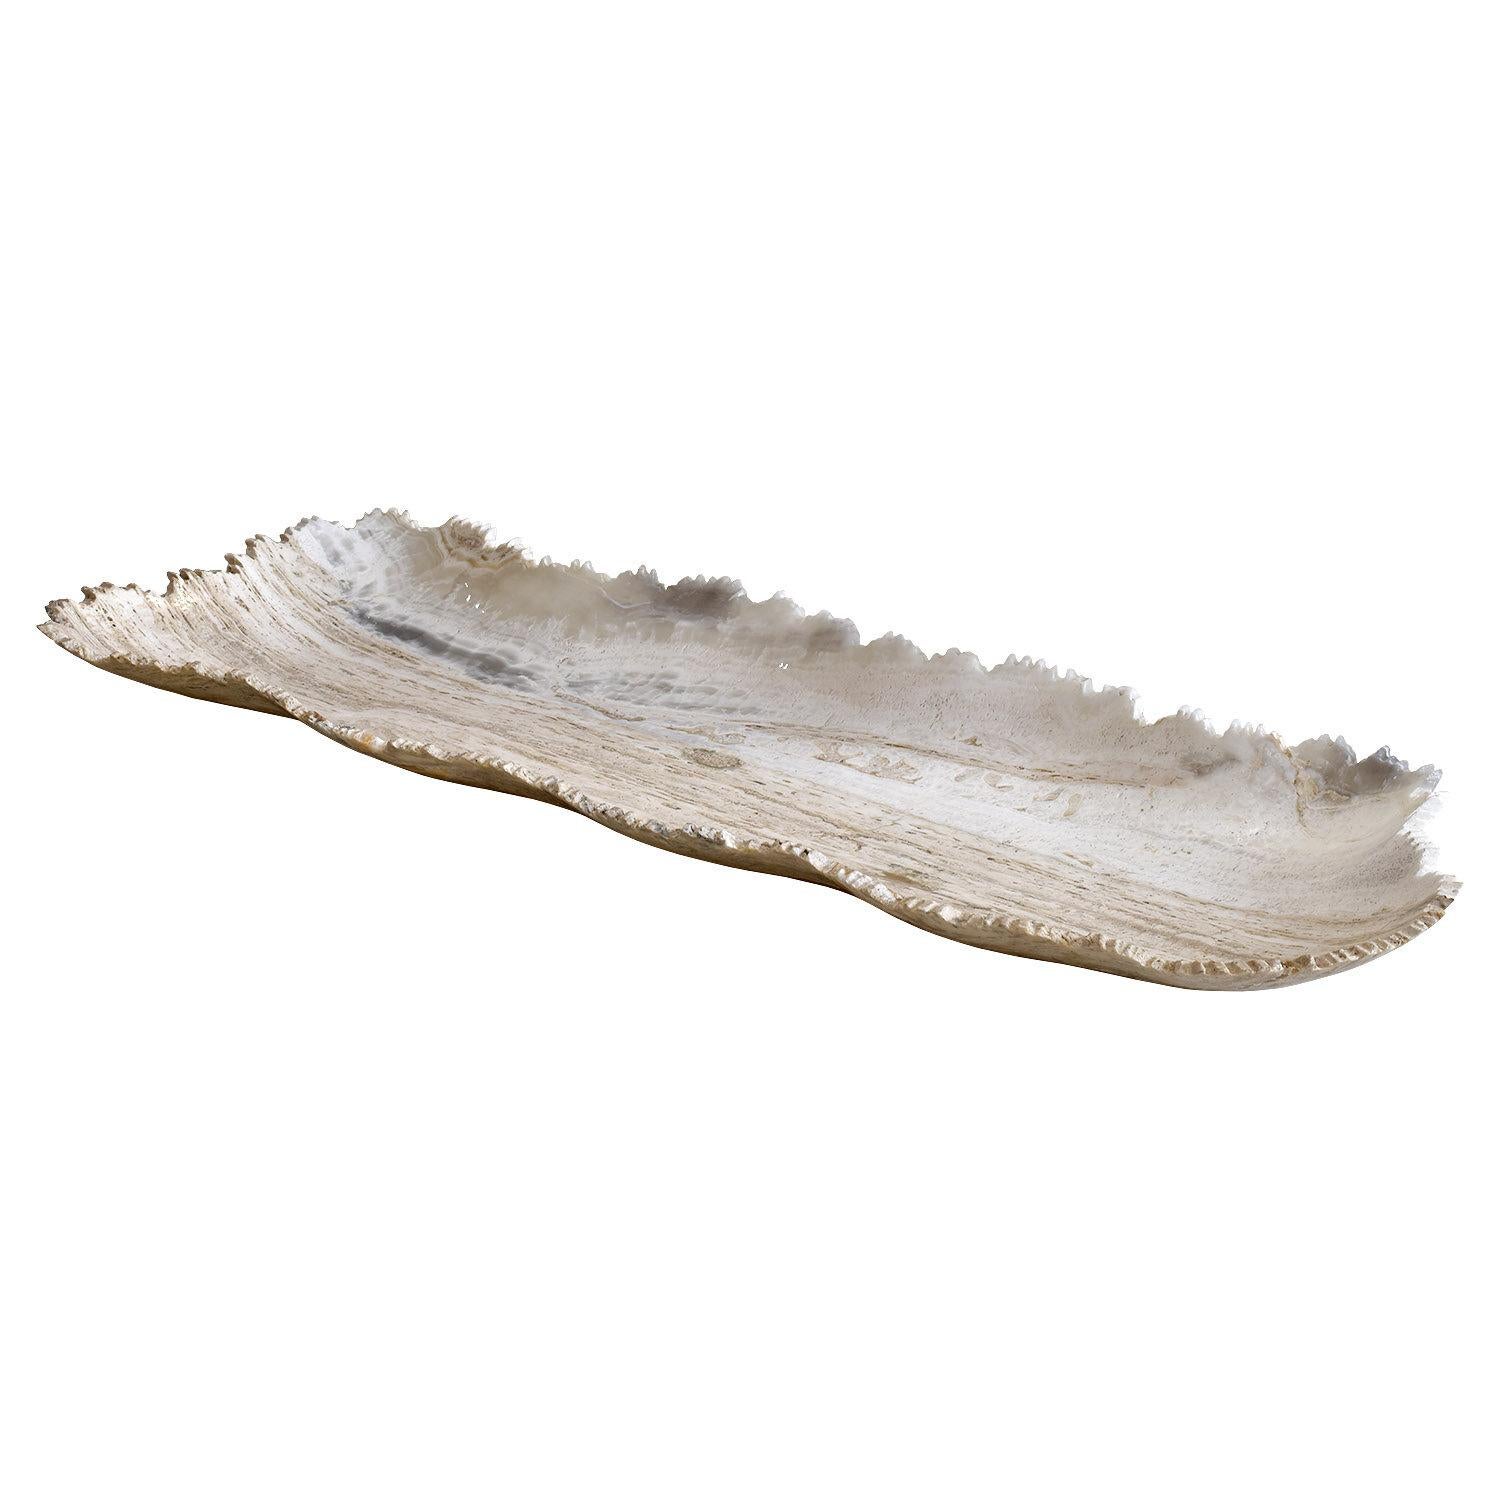 Handmade in Mexico
Carved from a single piece of onyx
One of a kind
Dimensions: 33 x 12 x 2 in. / 84 x 30 x 5 cm

A slim, long, low, organic platter from naturally colored stone with the mineral formations within the rock similar to looking at